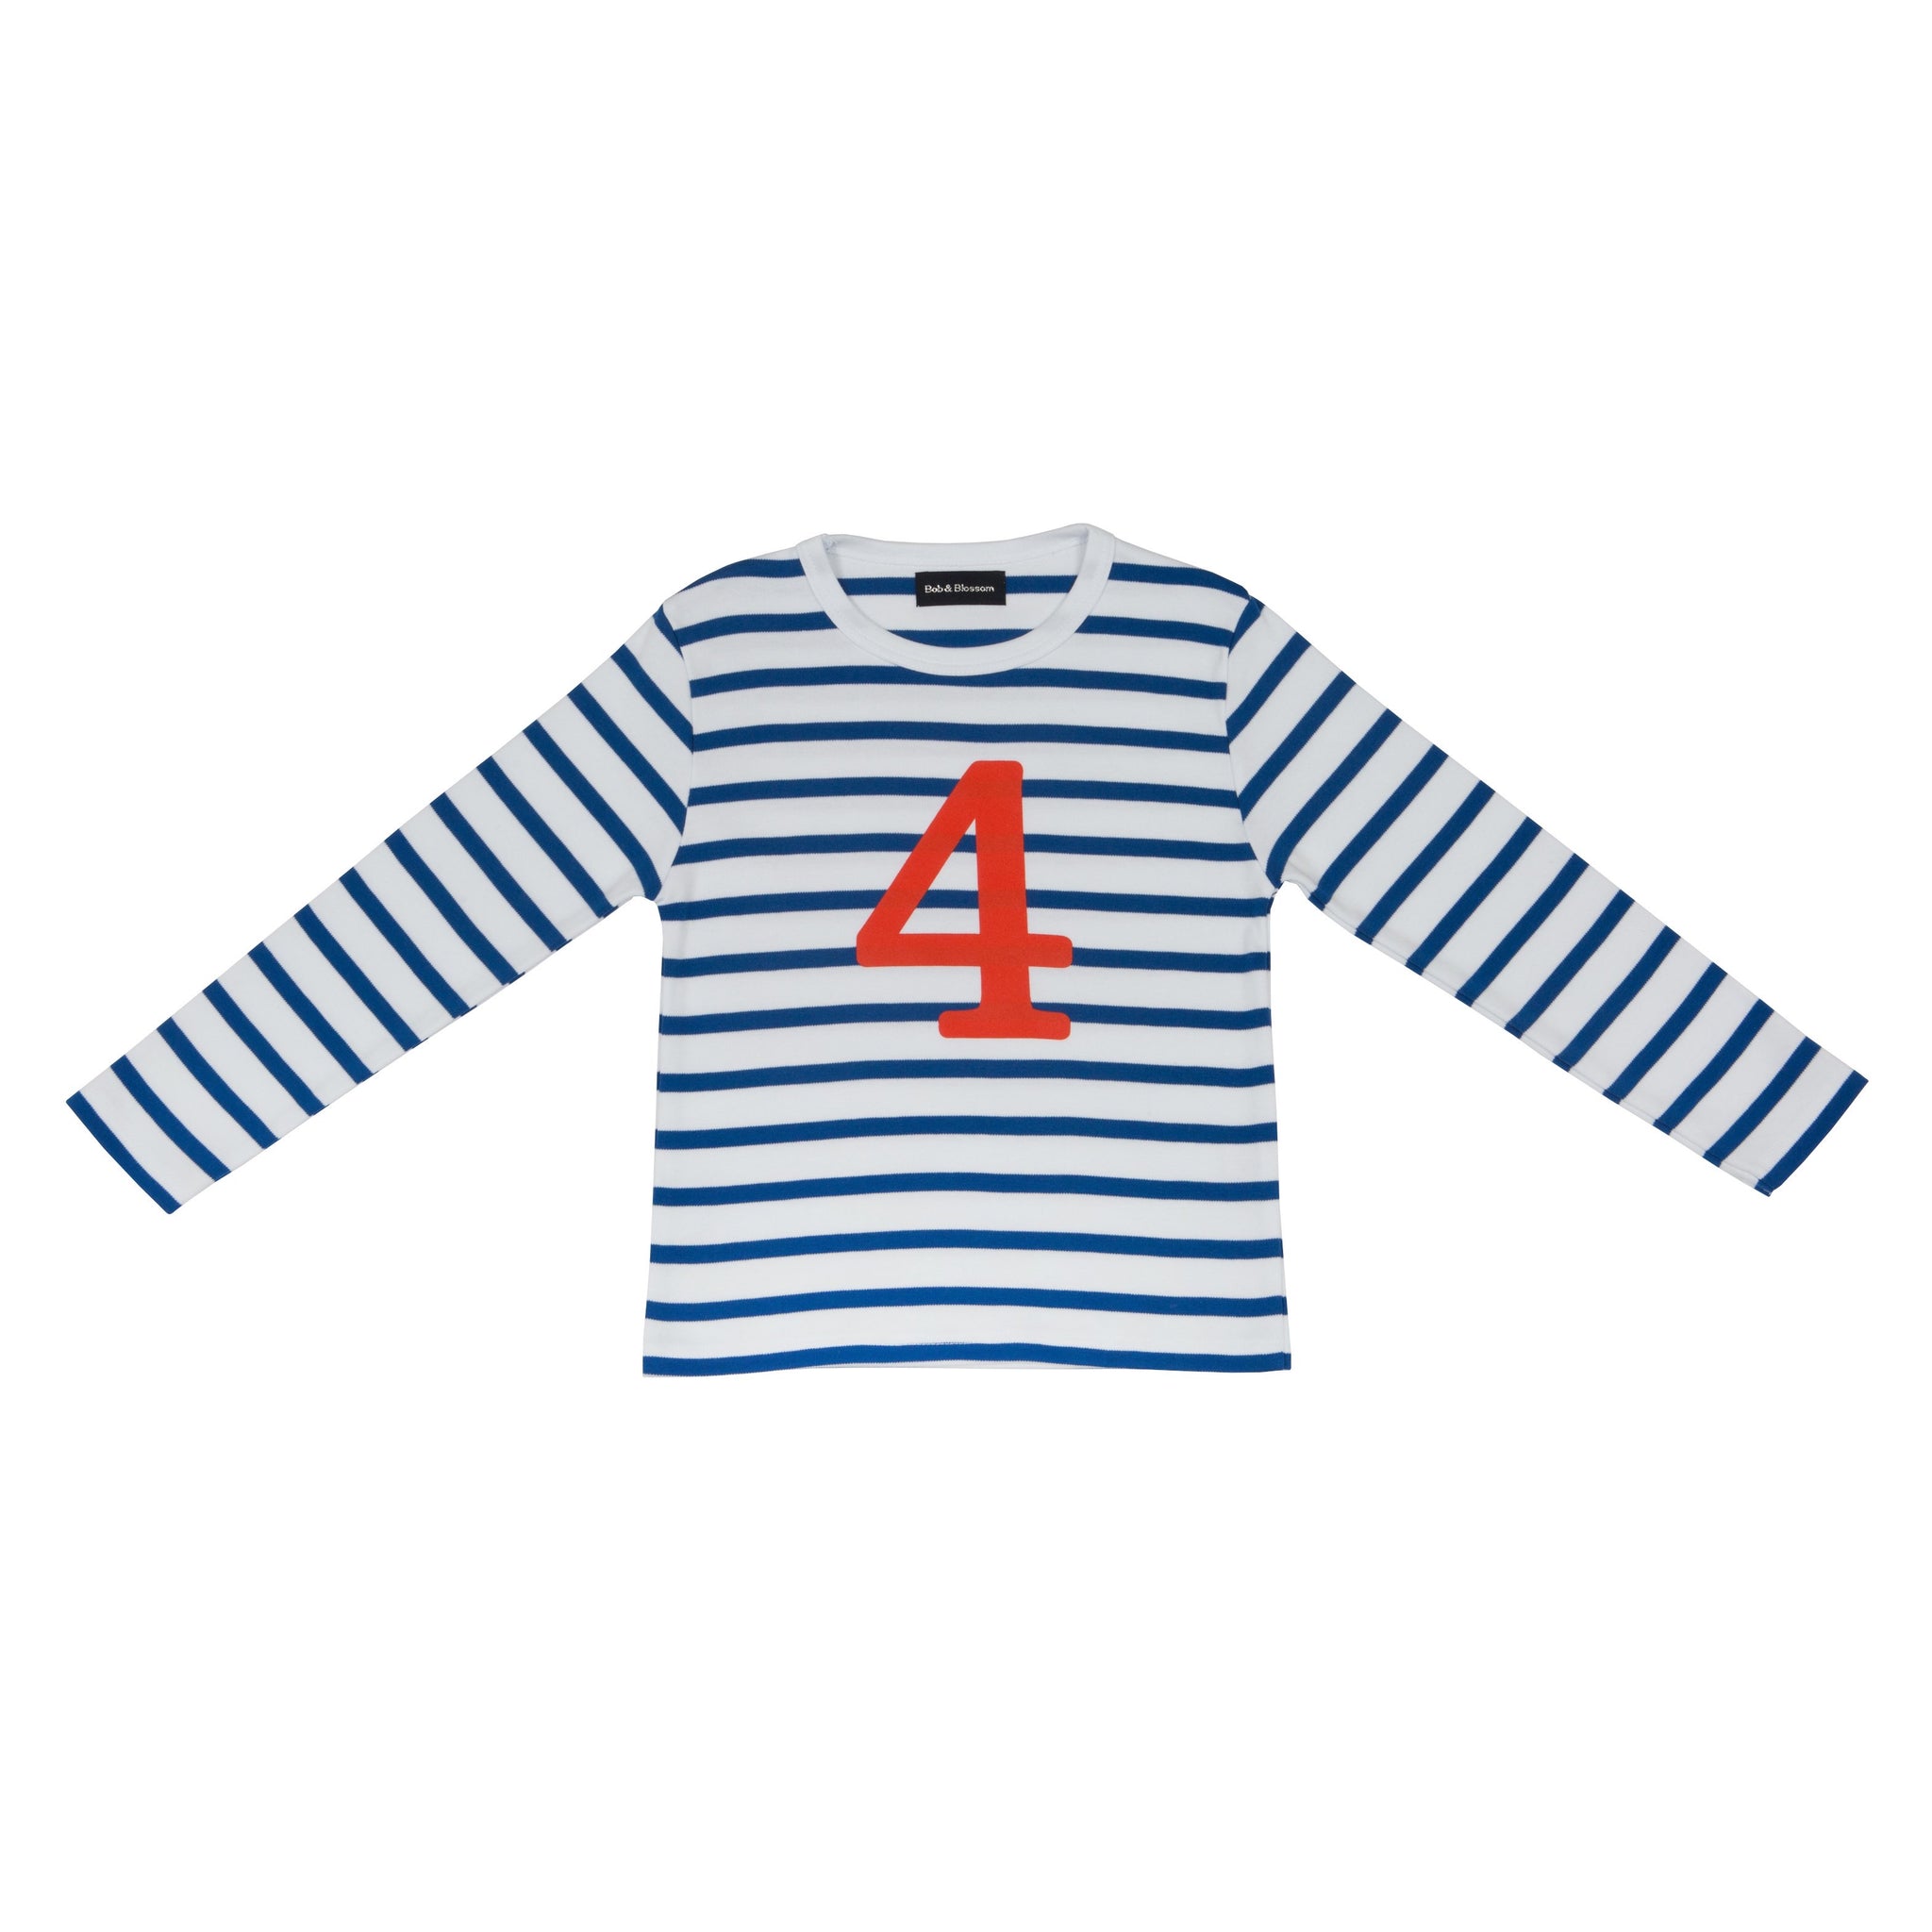 Striped Number T Shirt - French Blue & White 4-5 Years